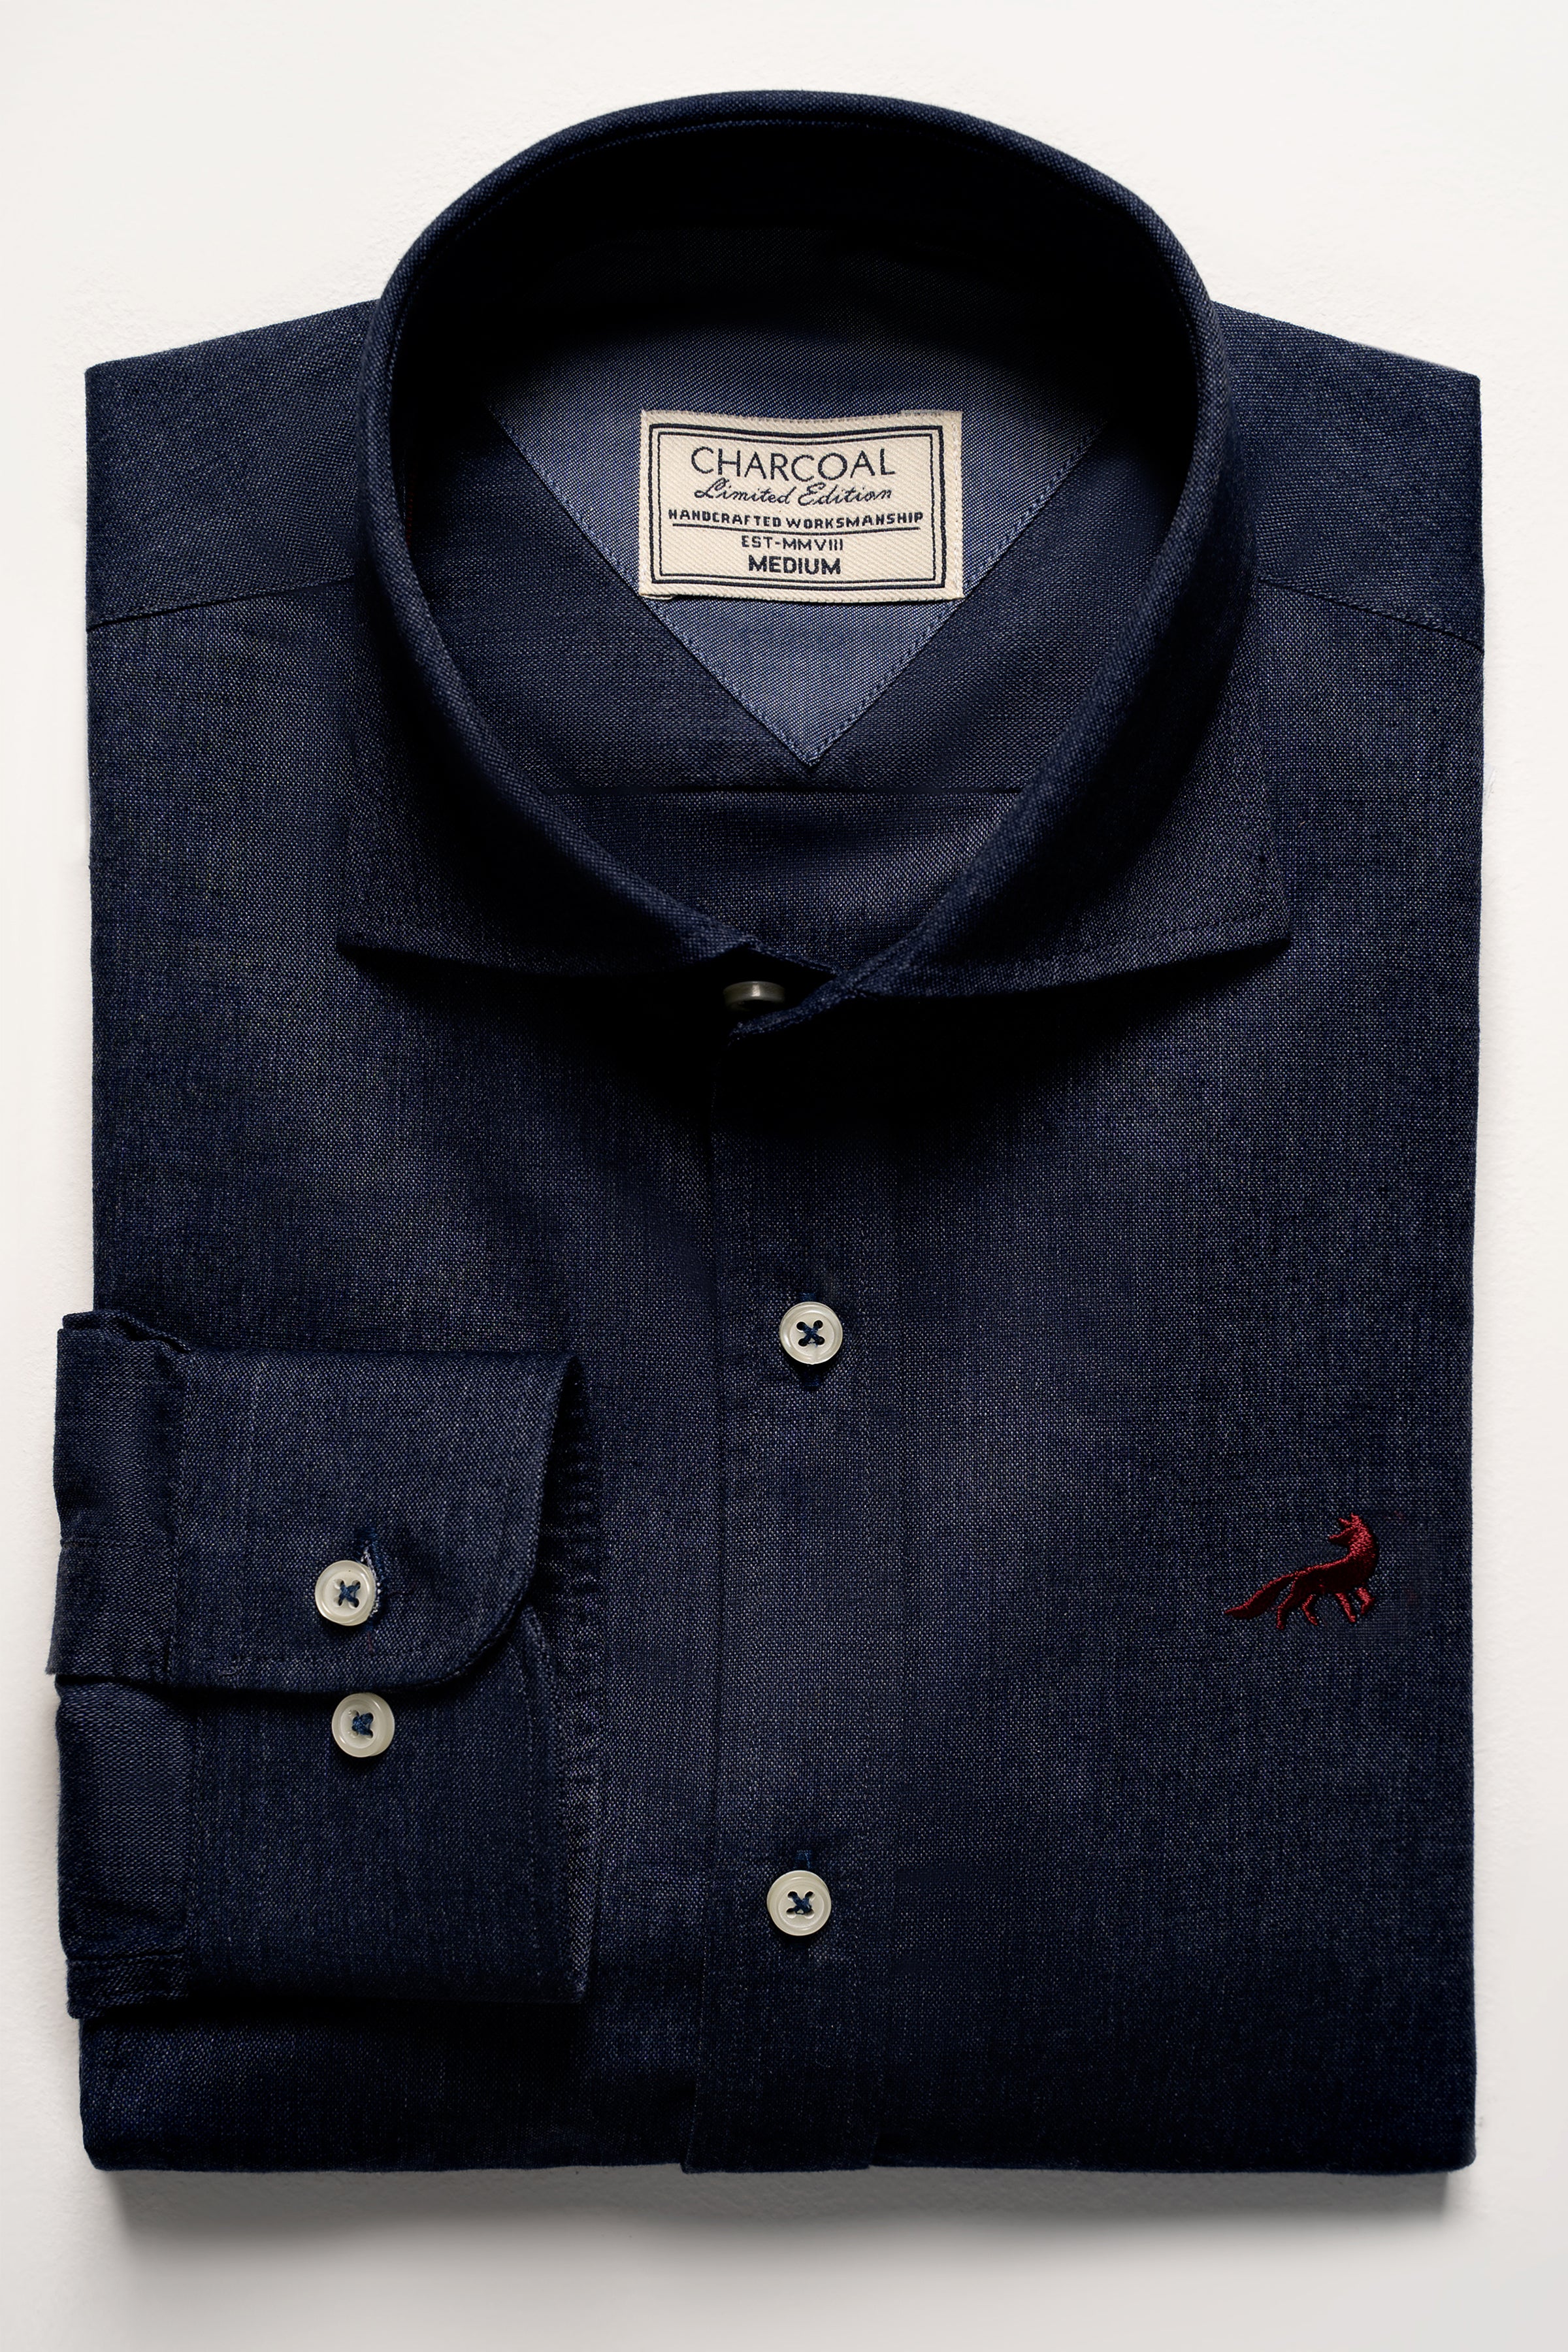 LIMITED EDITION SHIRTS NAVY BLUE